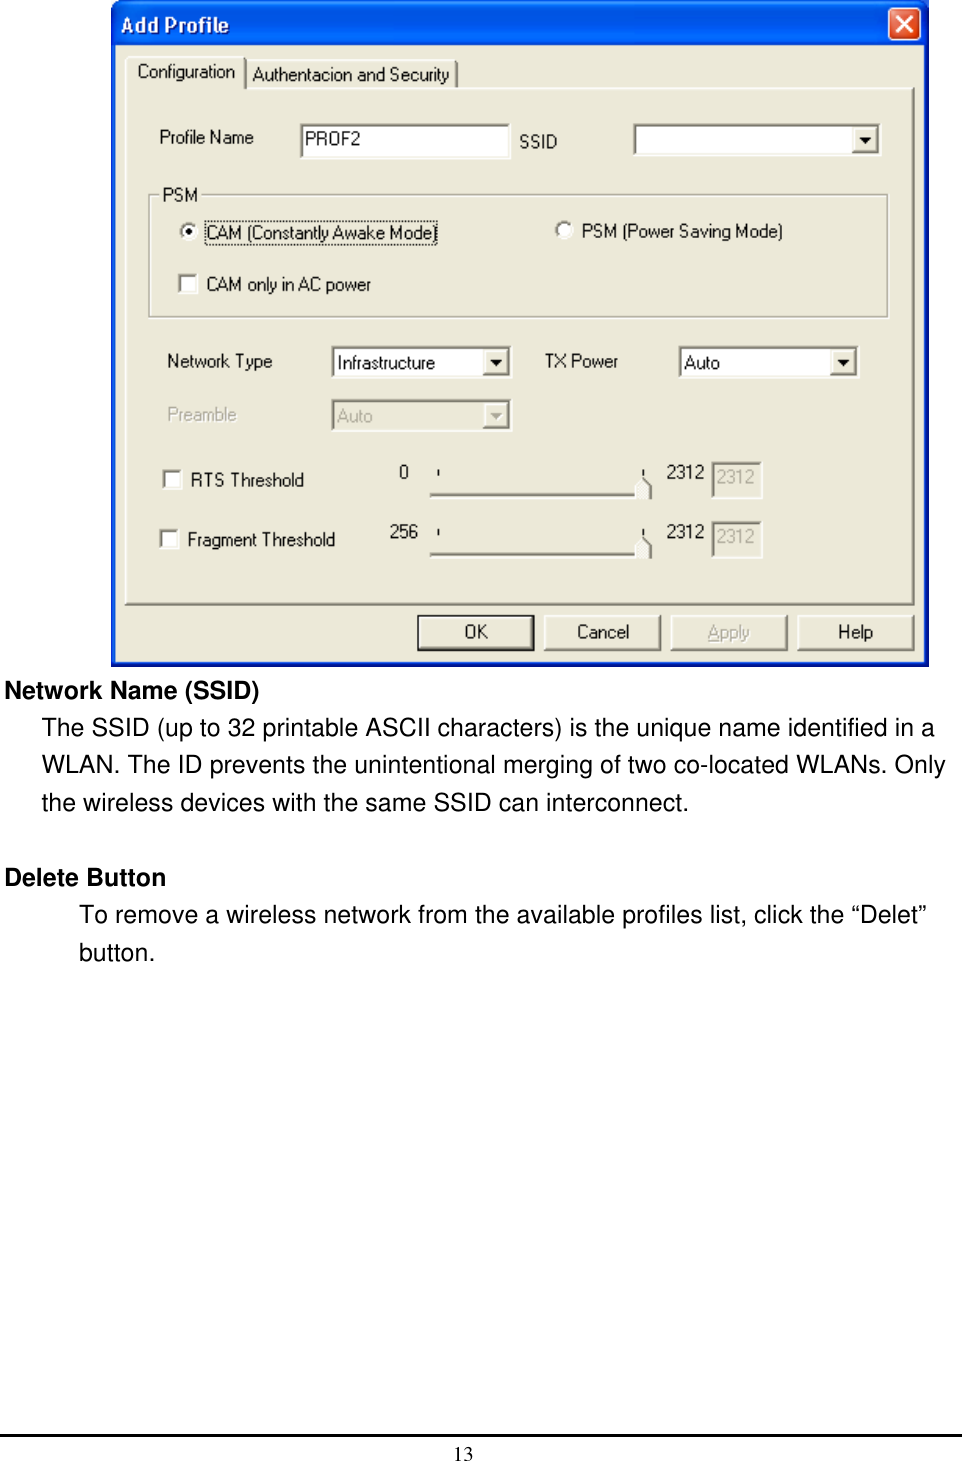   Network Name (SSID) The SSID (up to 32 printable ASCII characters) is the unique name identified in a WLAN. The ID prevents the unintentional merging of two co-located WLANs. Only the wireless devices with the same SSID can interconnect.  Delete Button To remove a wireless network from the available profiles list, click the “Delet” button.  13  